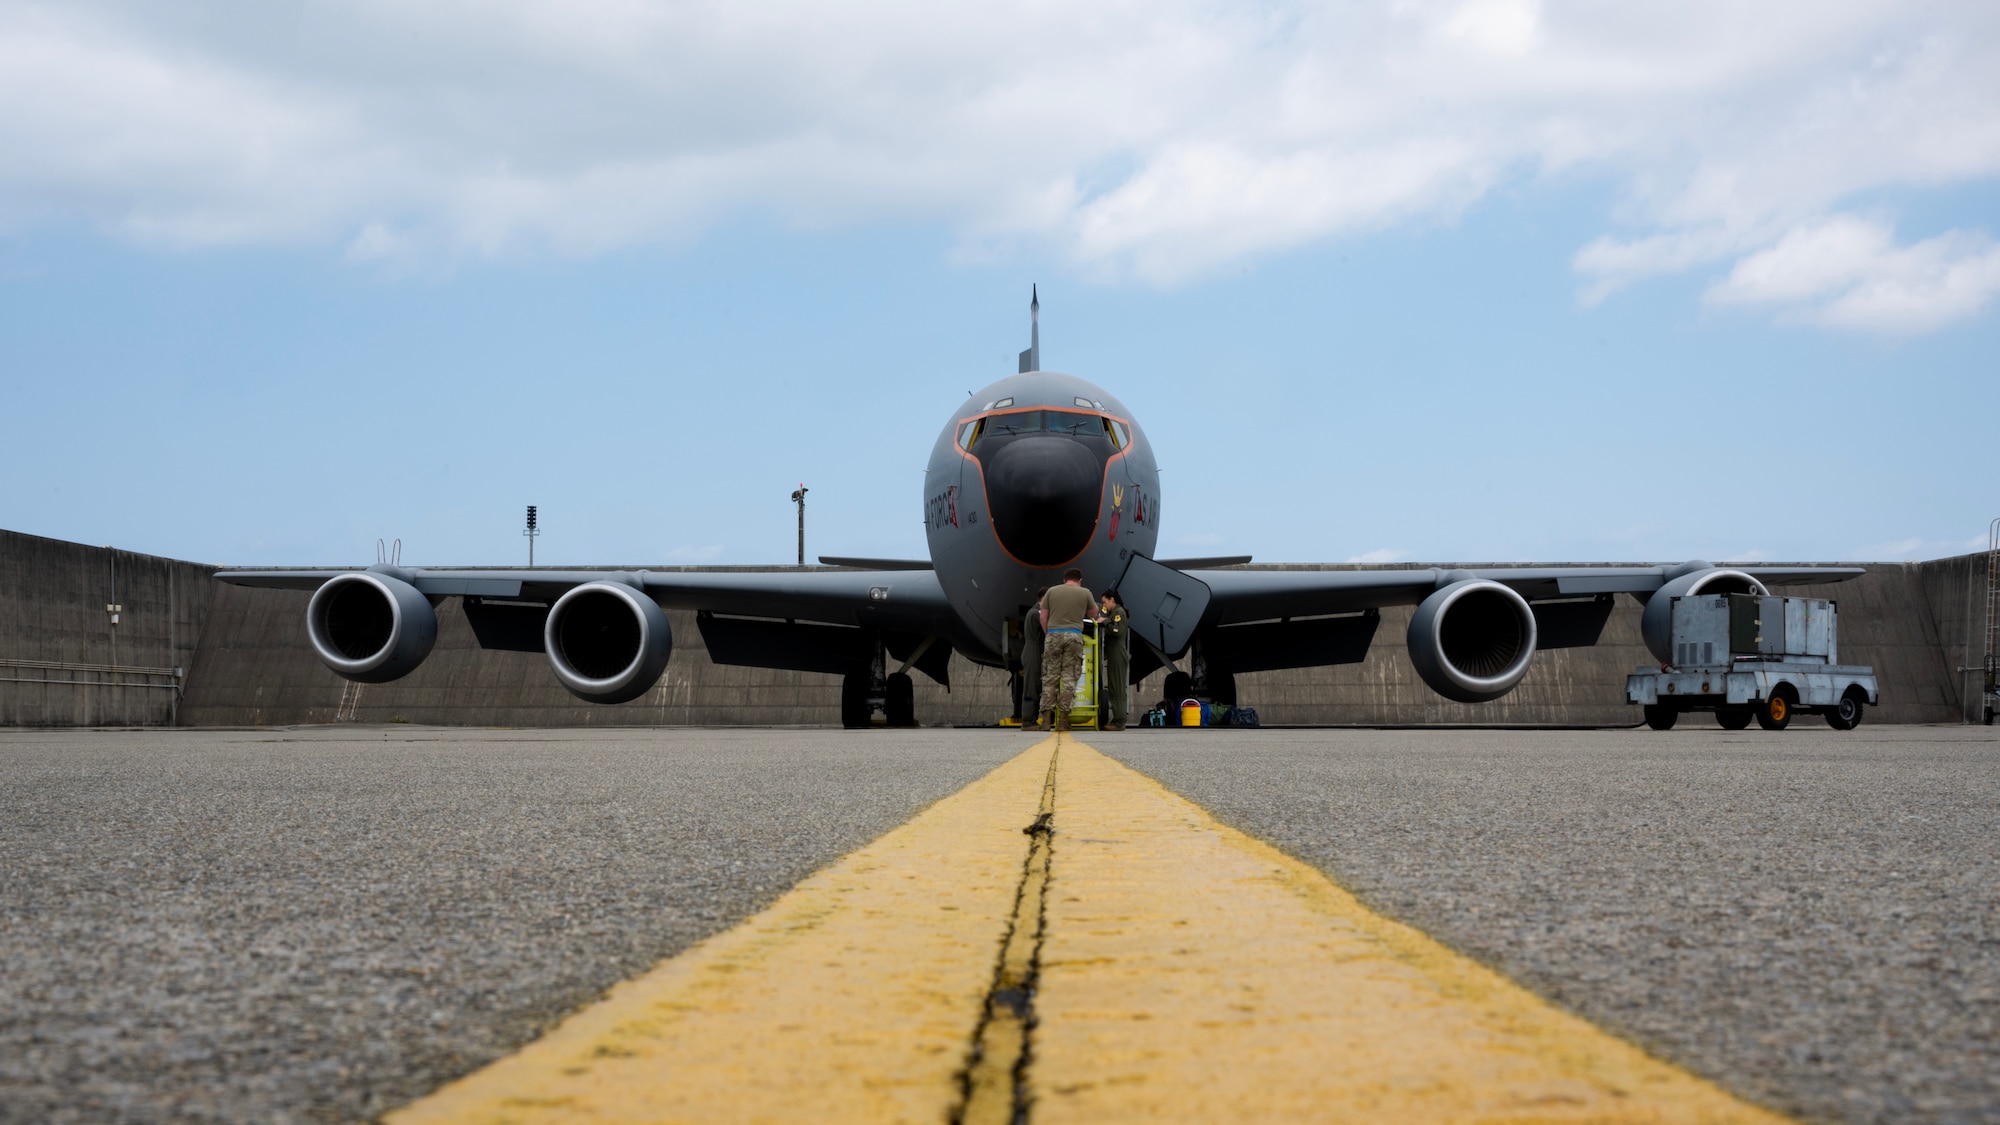 A U.S. Air Force KC-135 Stratotanker assigned to the 909th Air Refueling Squadron is parked on the flightline prior to a refueling mission at Kadena Air Base, Japan, March 19, 2023. The KC-135 Stratotanker provides the core aerial refueling capability for the Department of Defense, supporting the U.S. Navy, U.S. Marine Corps, and allied nation aircraft. (U.S. Air Force photo by Senior Airman Jessi Roth)